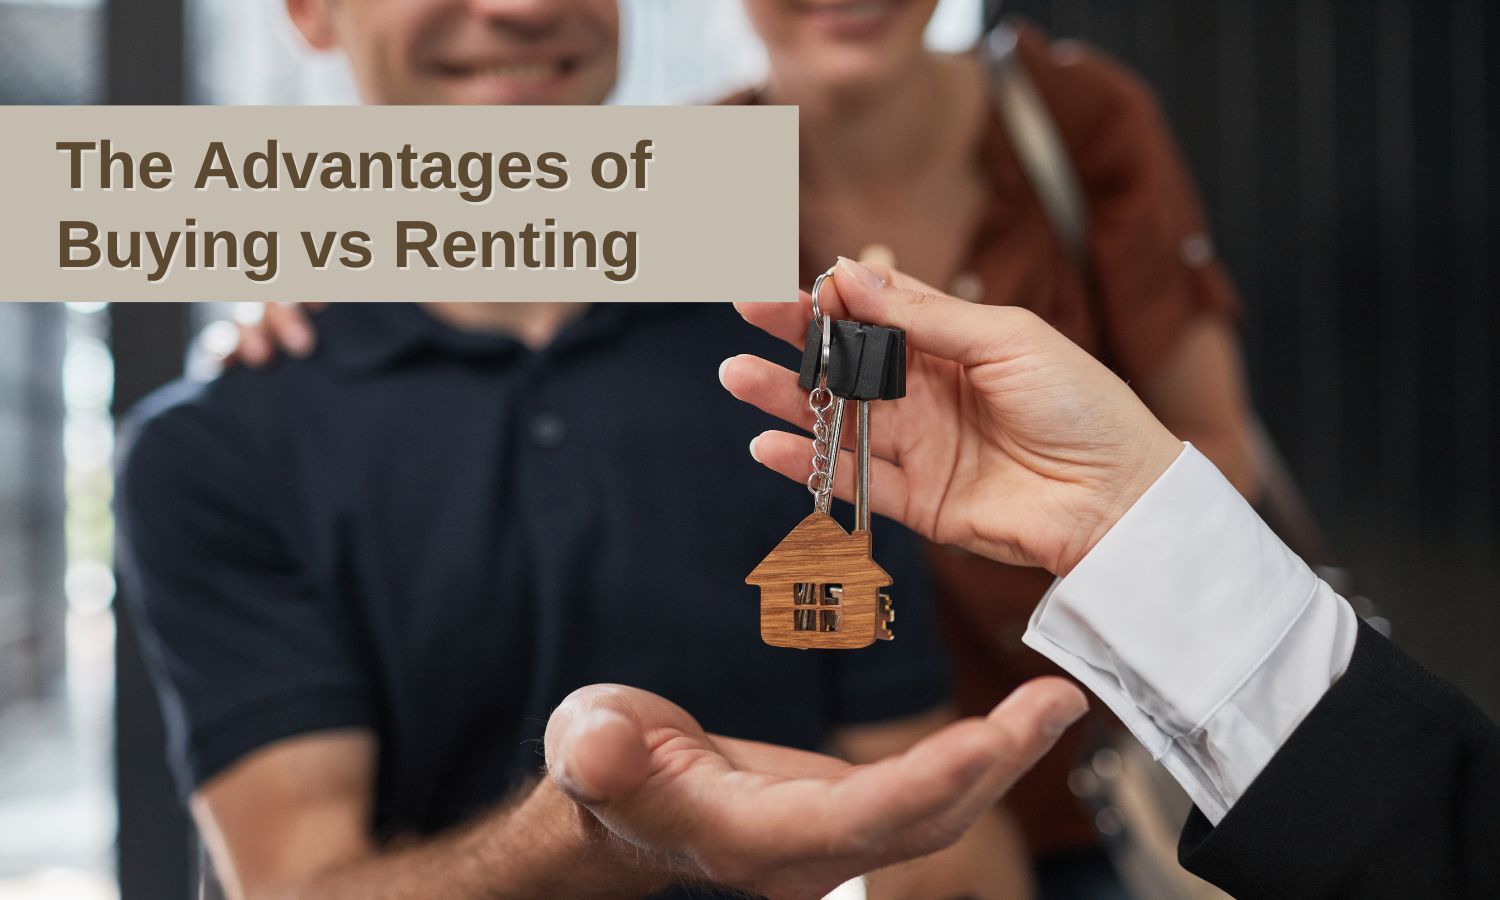 The Advantages of Buying a Home vs Renting